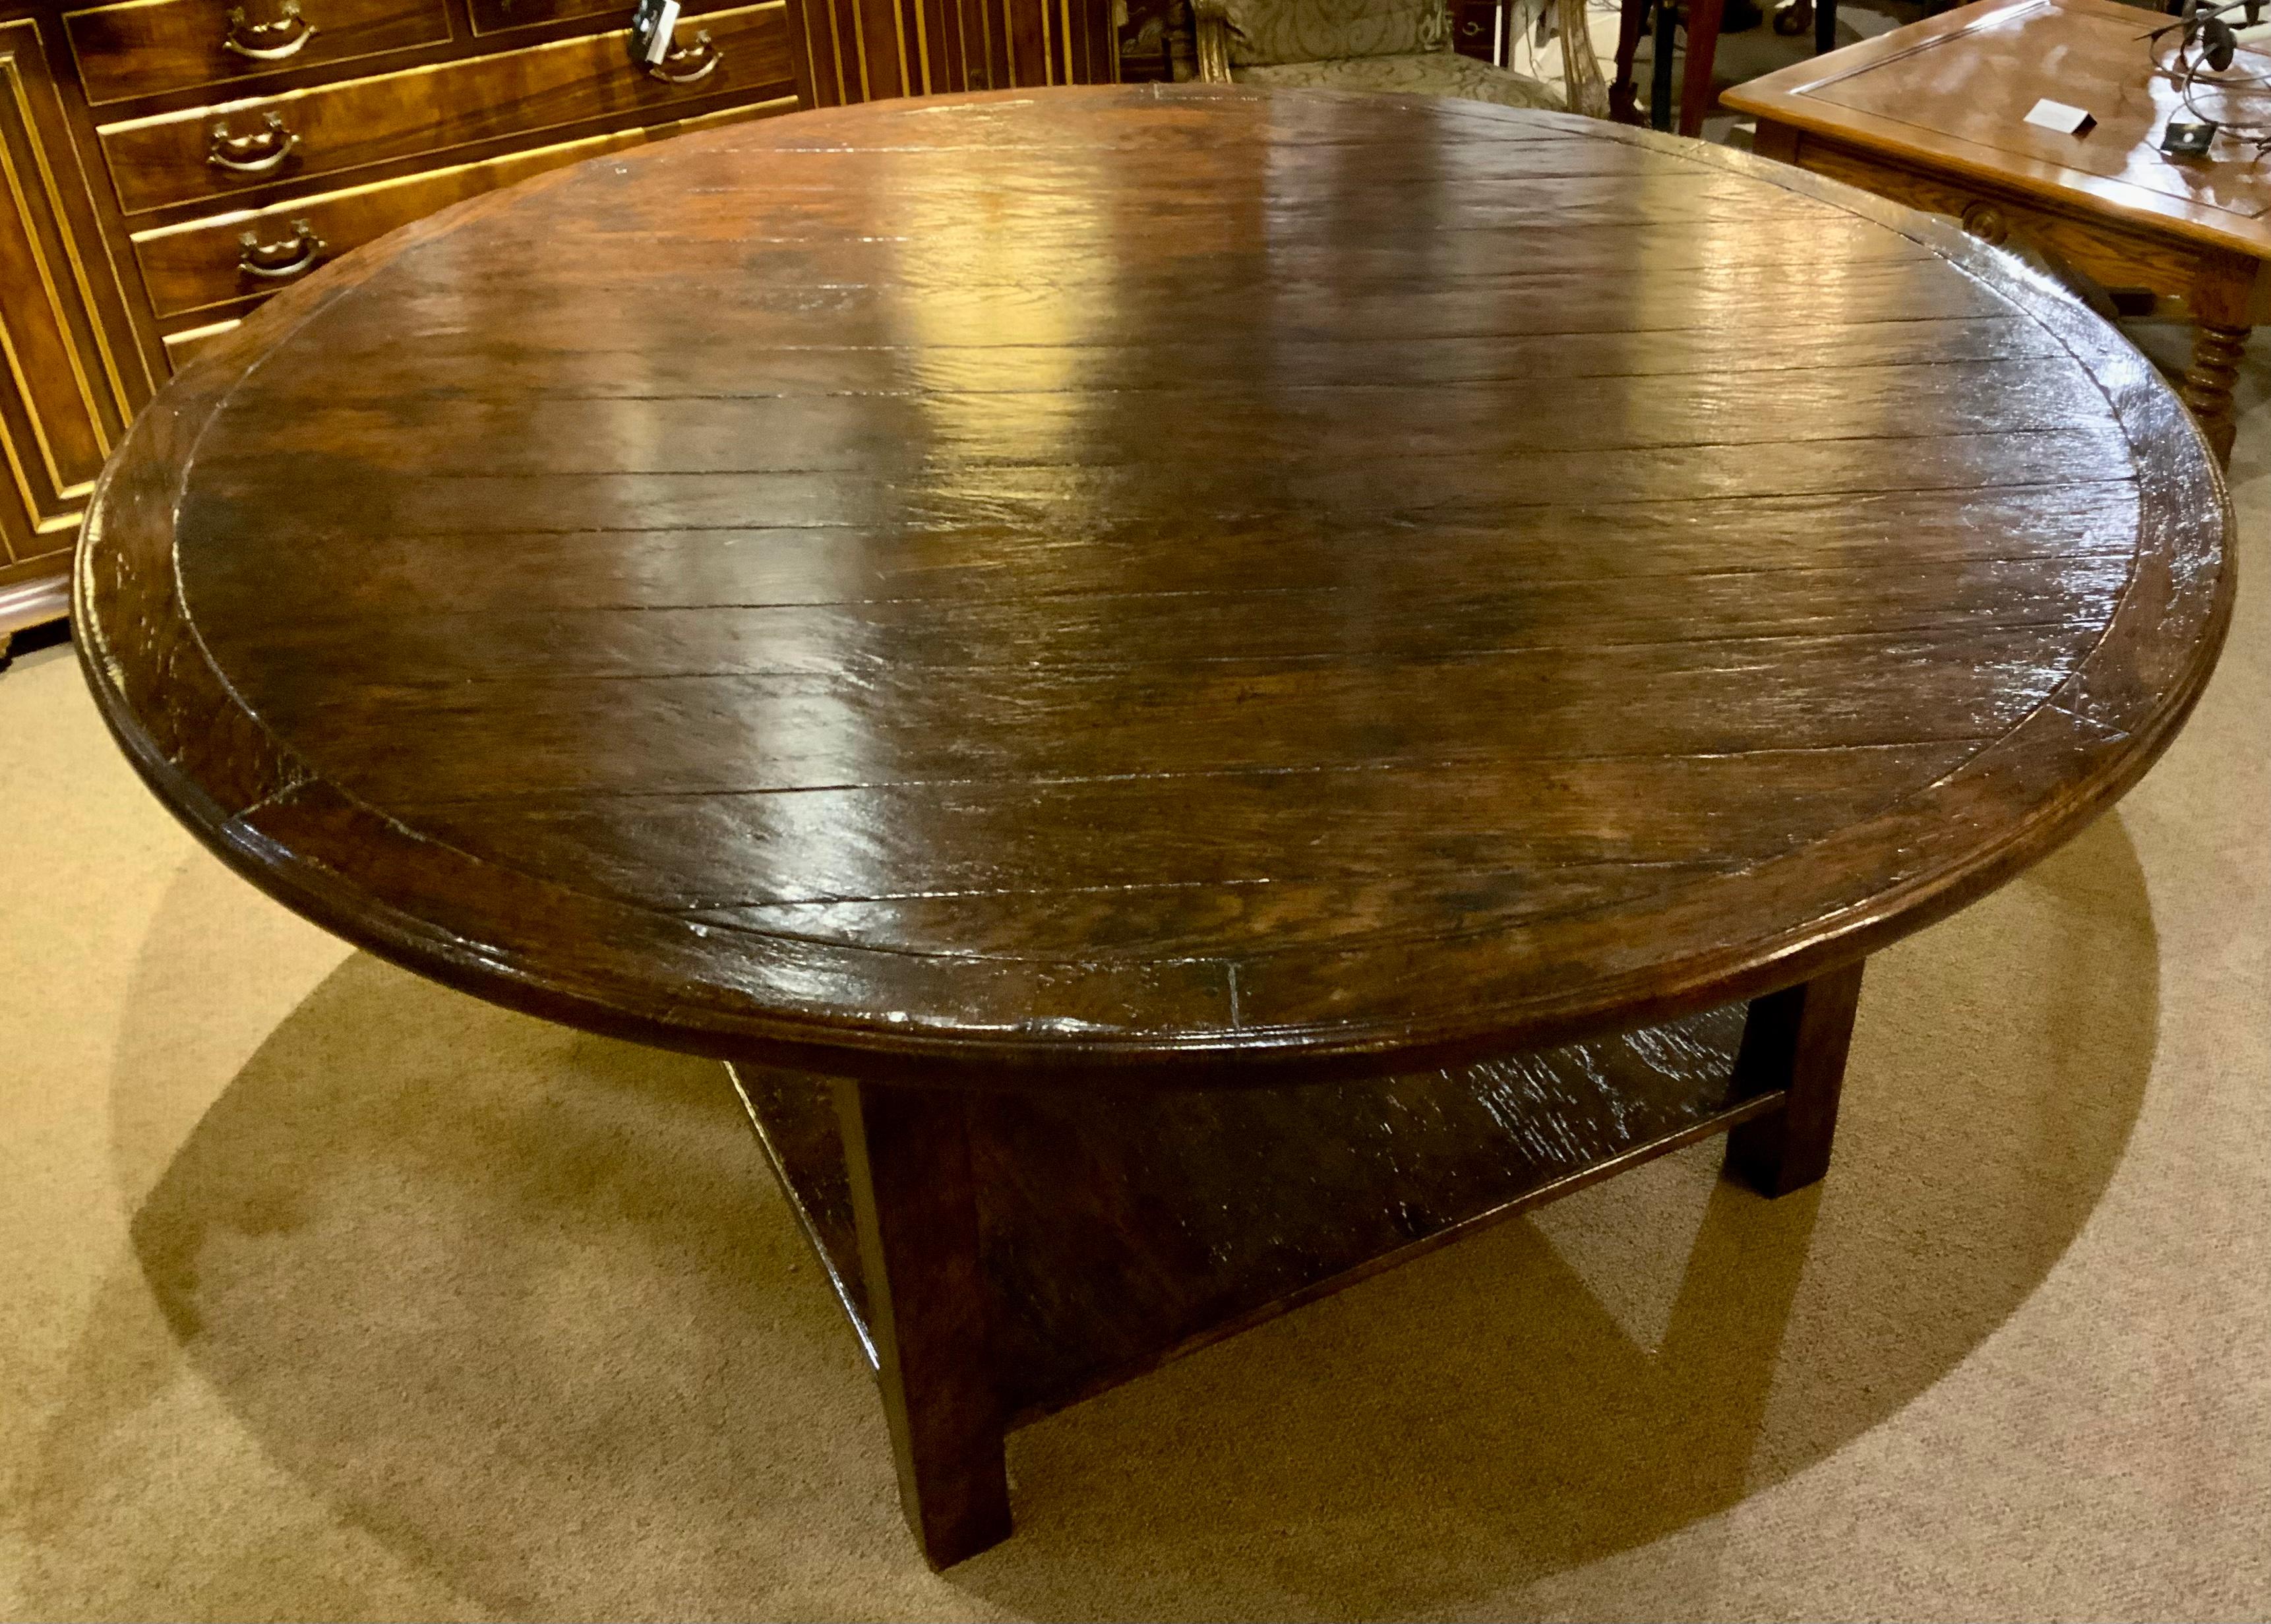 Large, Rustic Oak Round Dining Table In Excellent Condition For Sale In Houston, TX